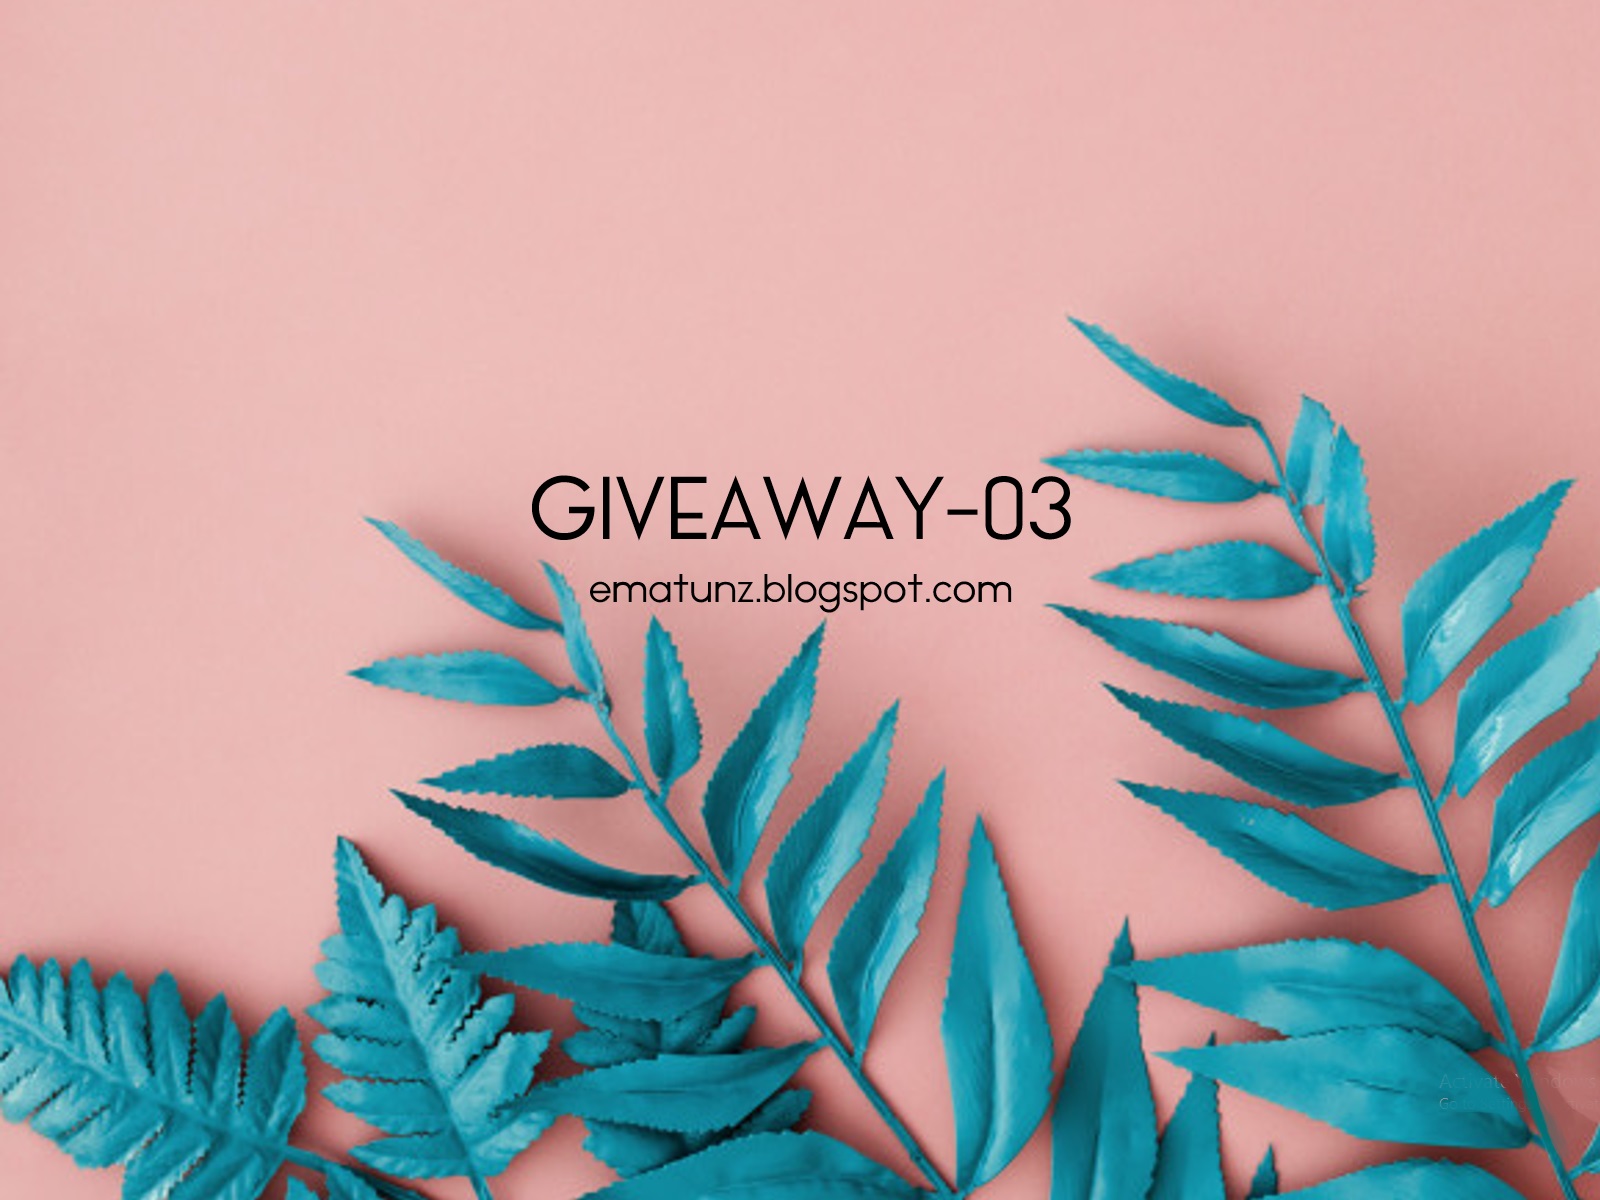 GIVEAWAY-03 BY EMATUNZ